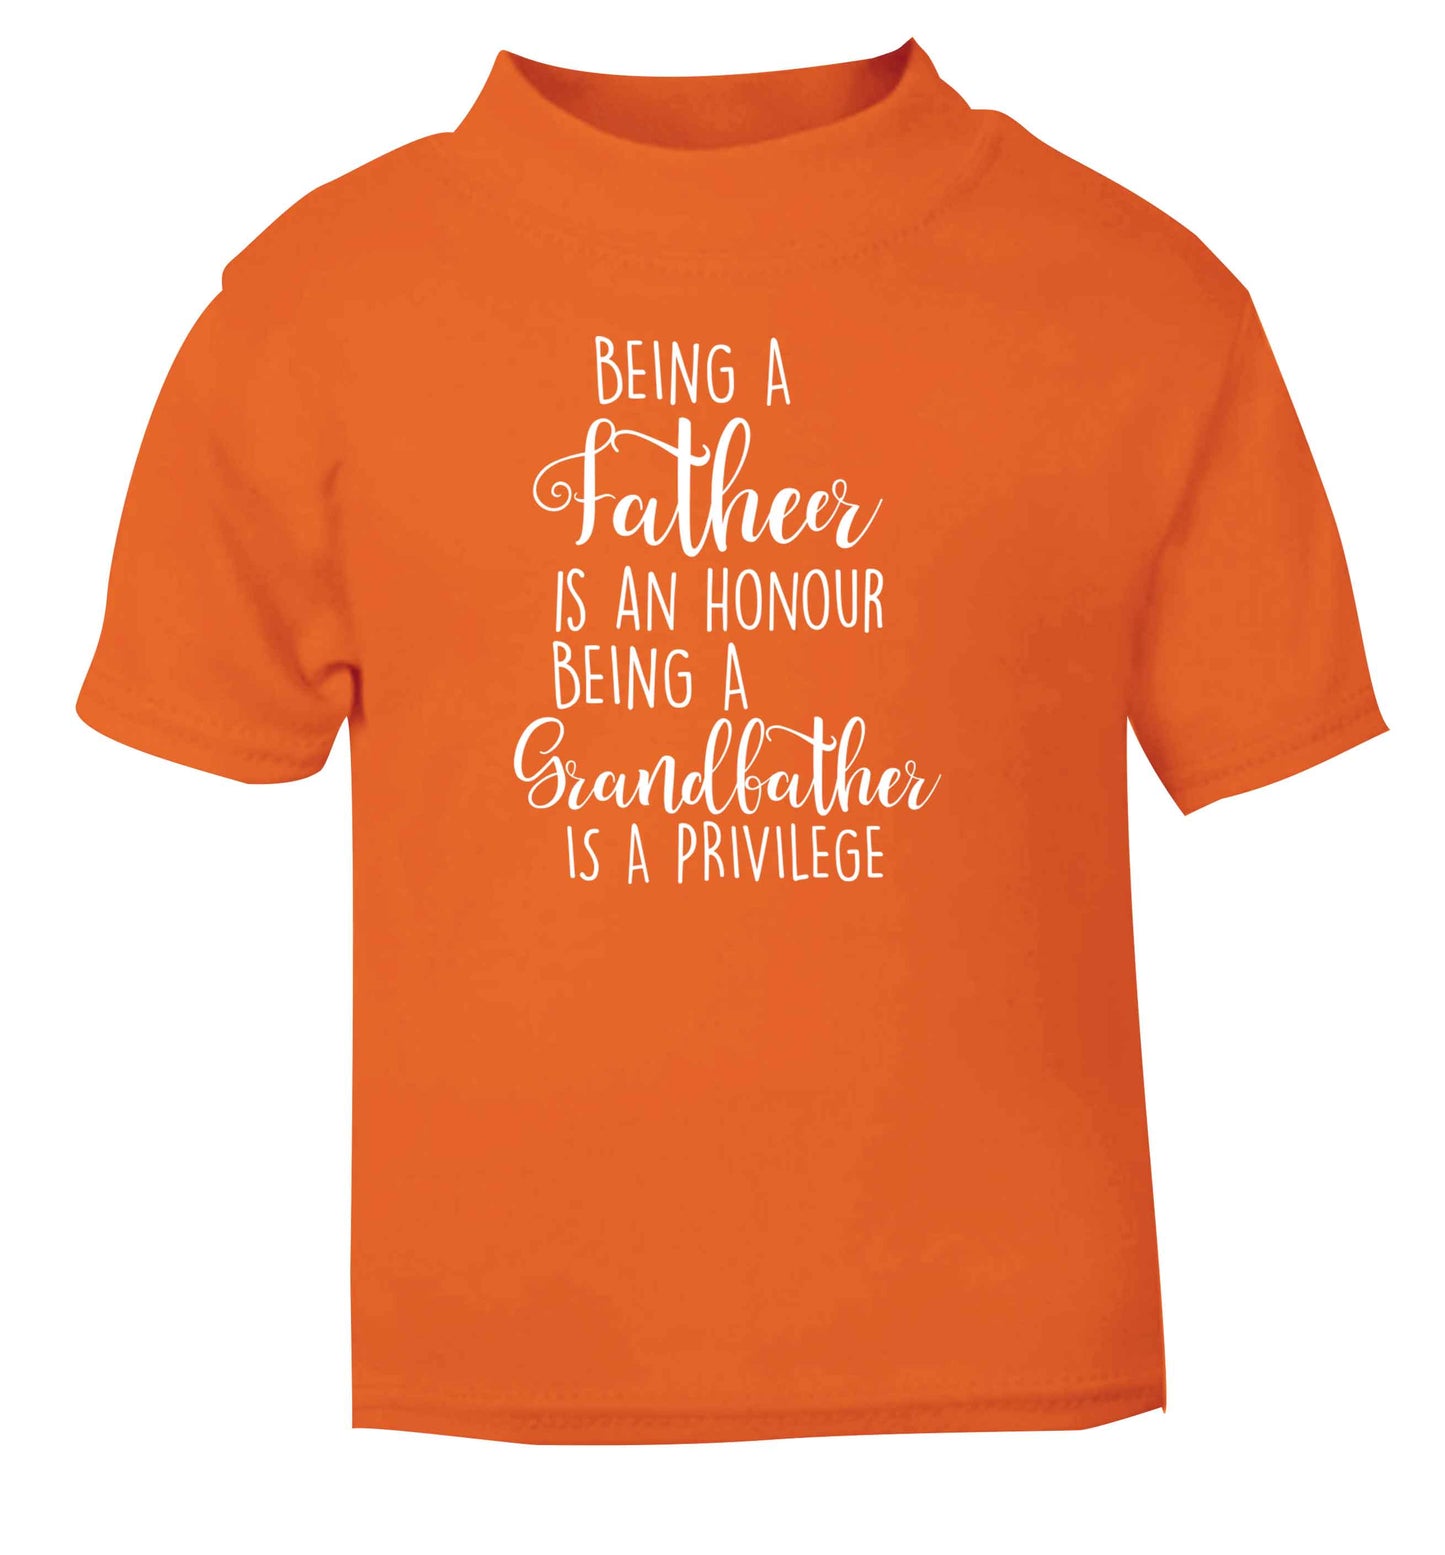 Being a father is an honour being a grandfather is a privilege orange Baby Toddler Tshirt 2 Years